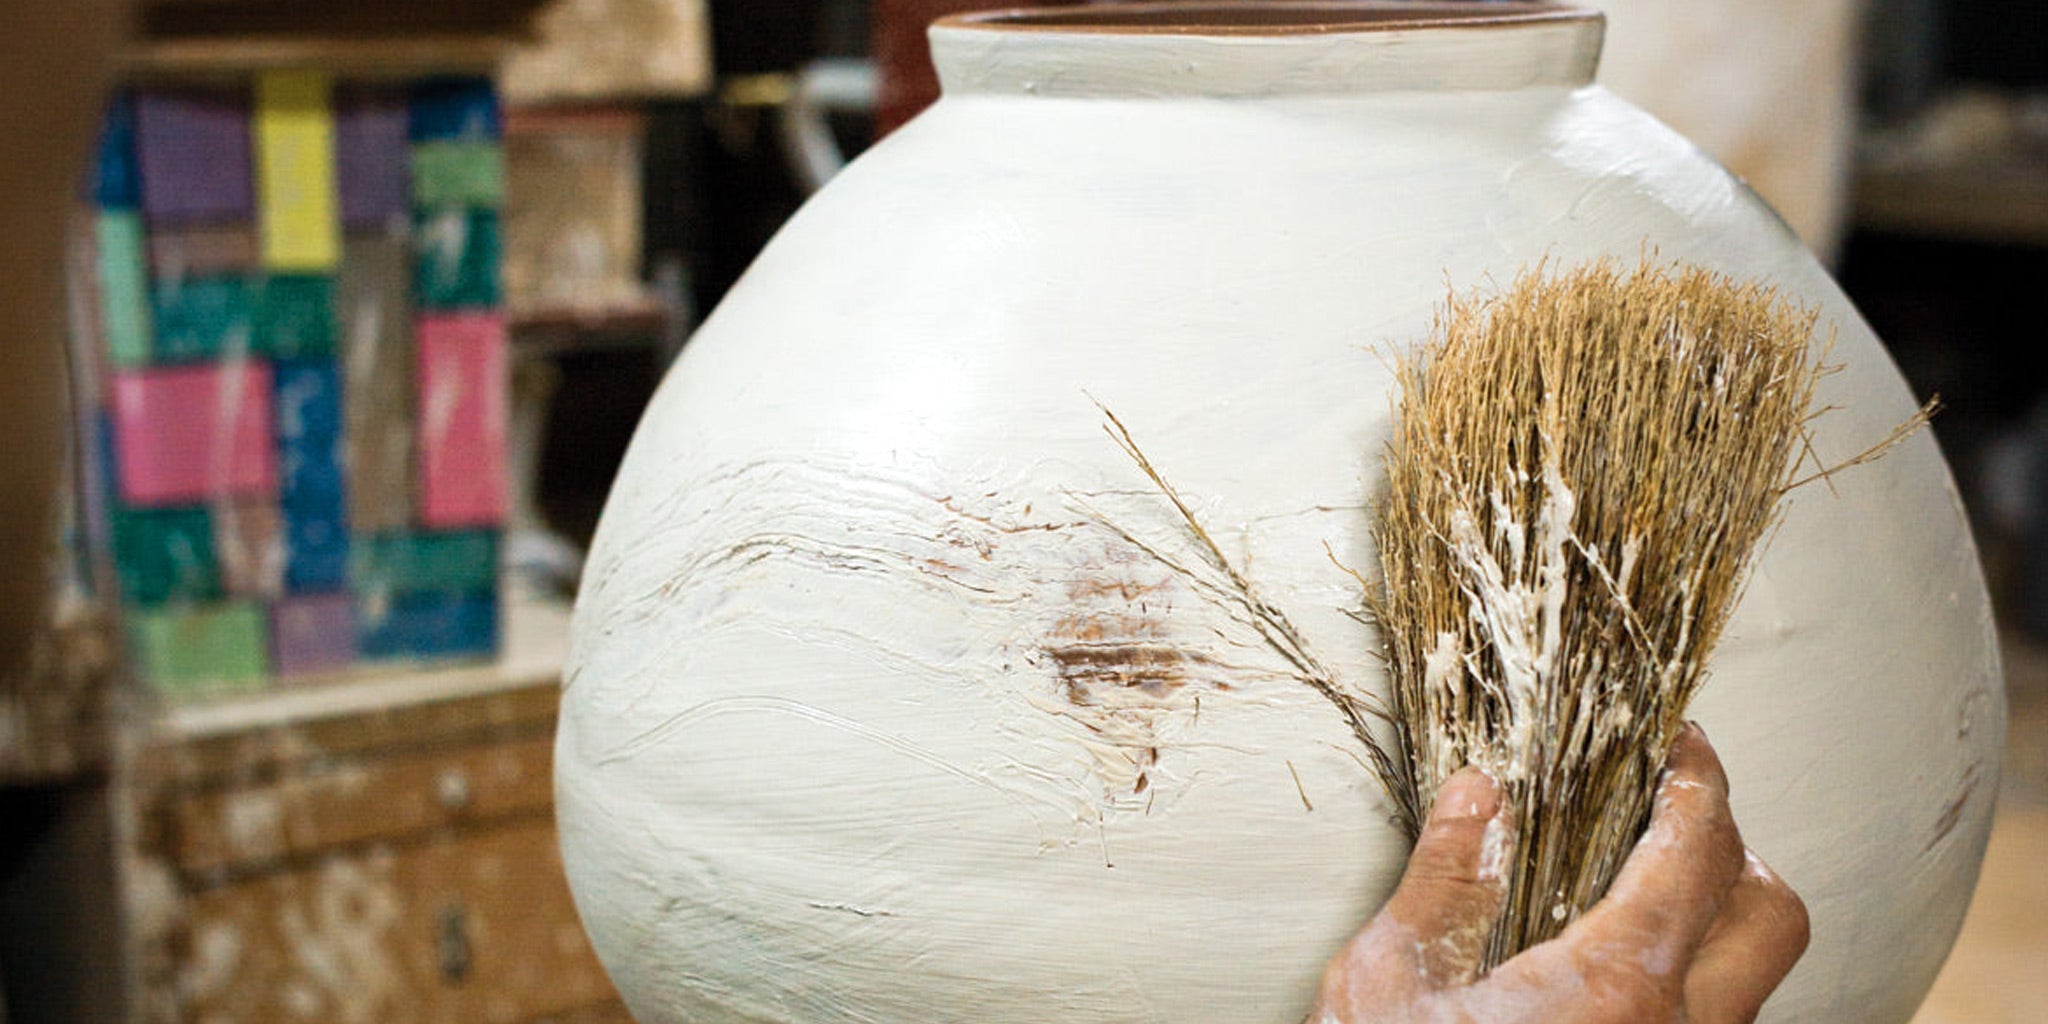 7 Simple Steps to Make Perfect Pottery with Clay